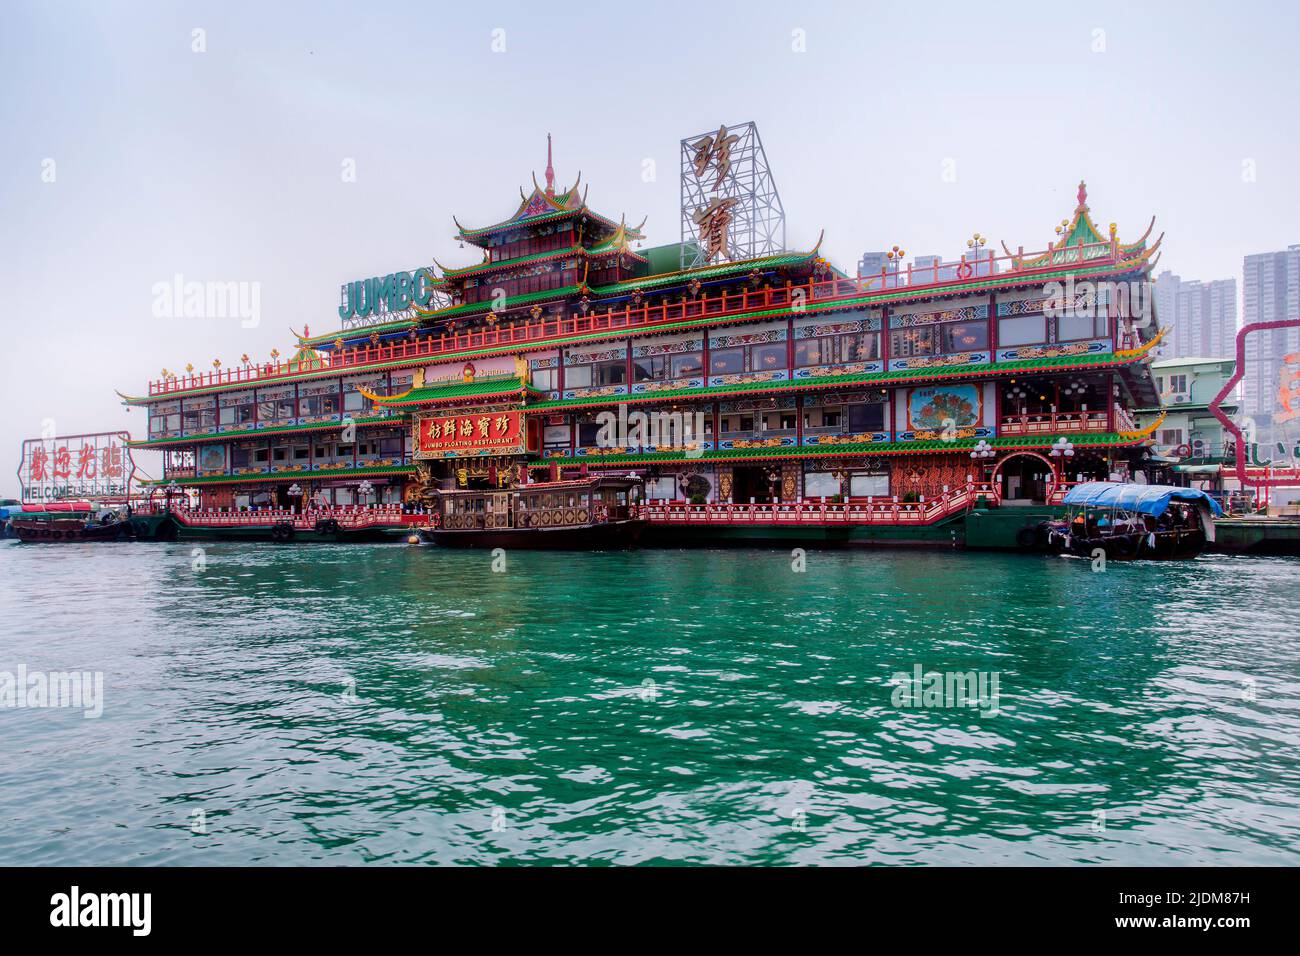 The Jumbo floating restaurant, a renowned tourist attraction within Hong Kong's Aberdeen Harbour. Stock Photo